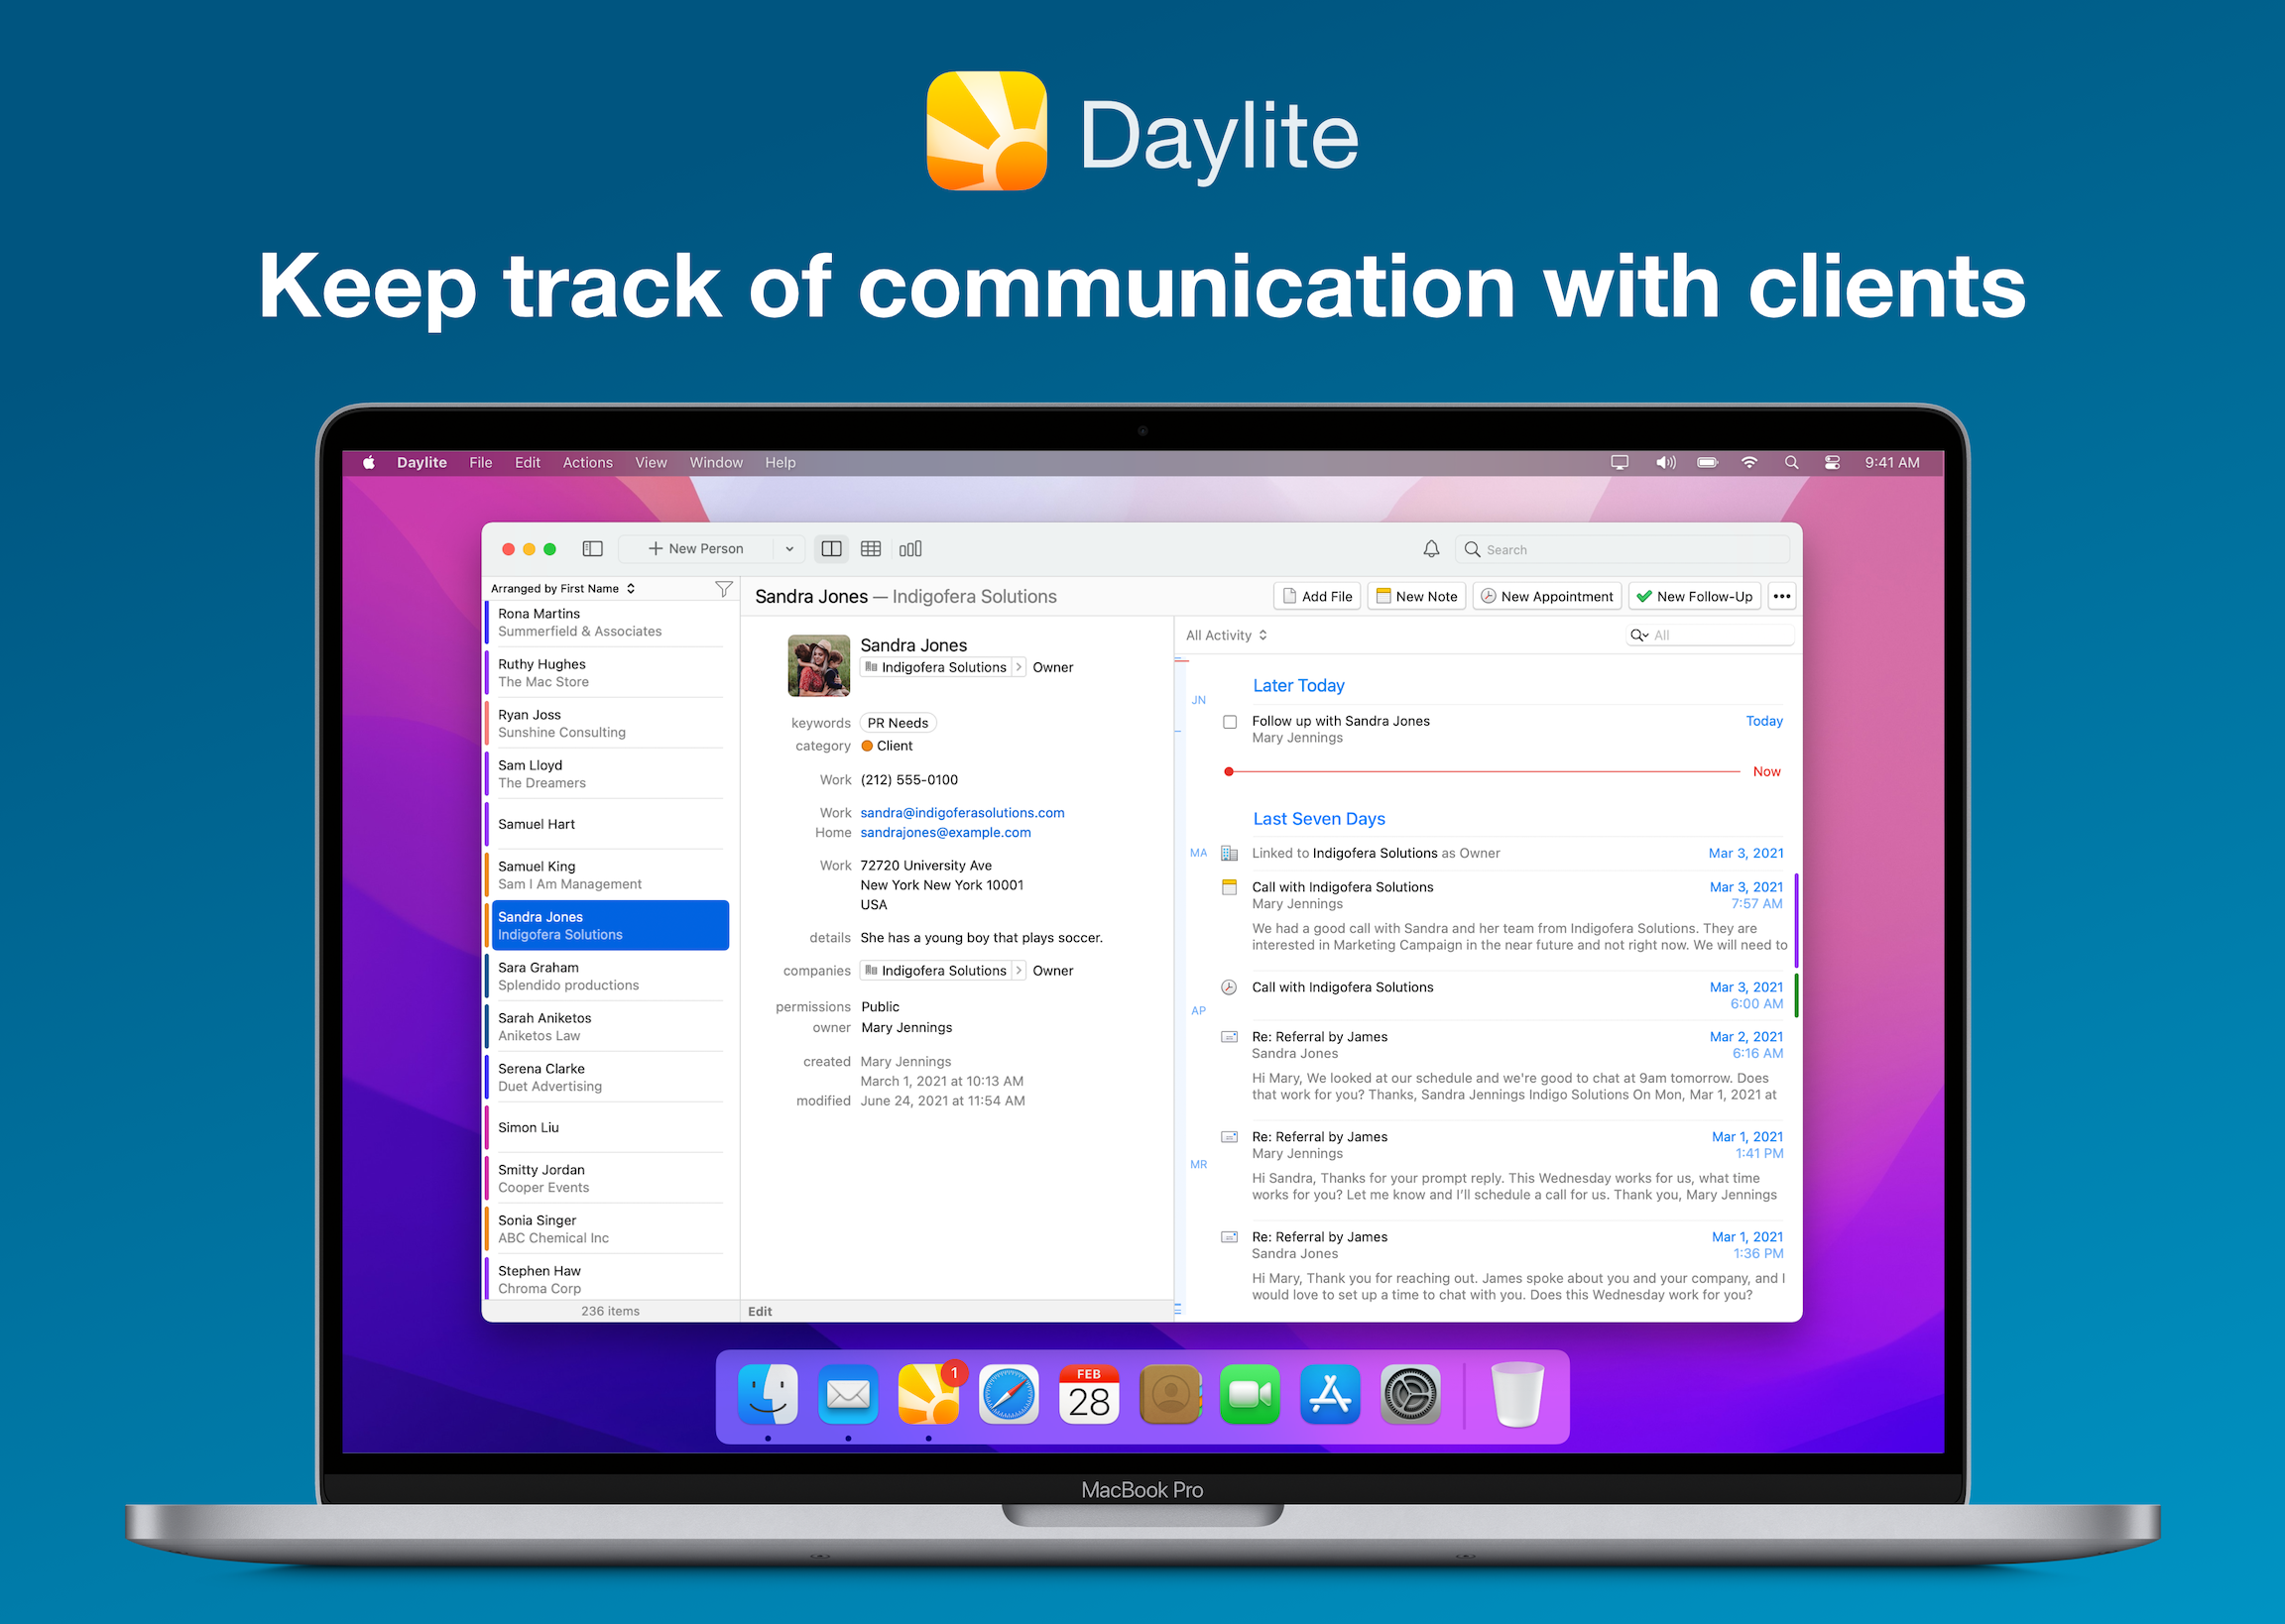 Daylite keeps you on the ball by organizing all the client communication and details in one place.